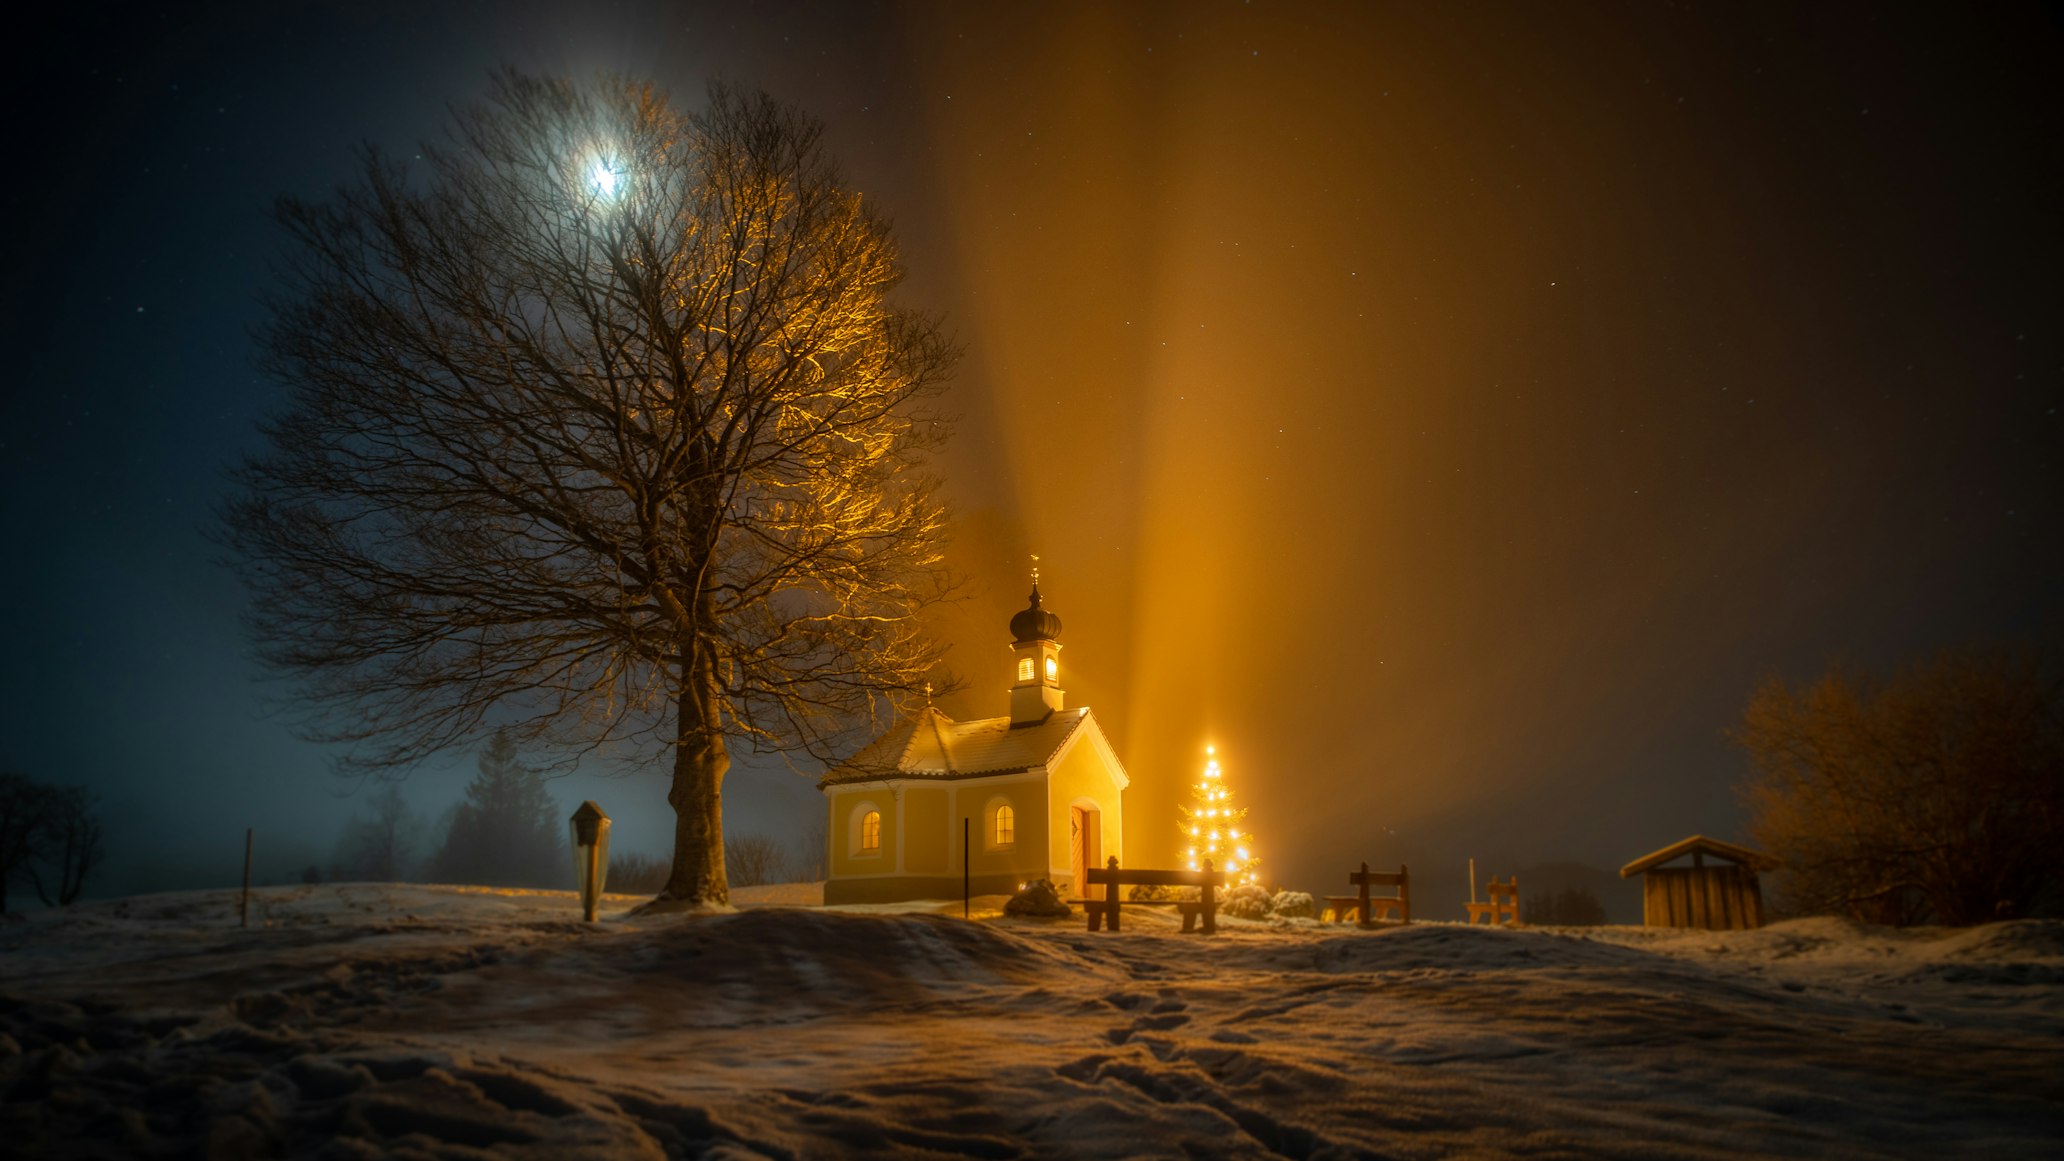 Nighttime photo of a small church in snowy landscape with glowing christmas tree in yard.